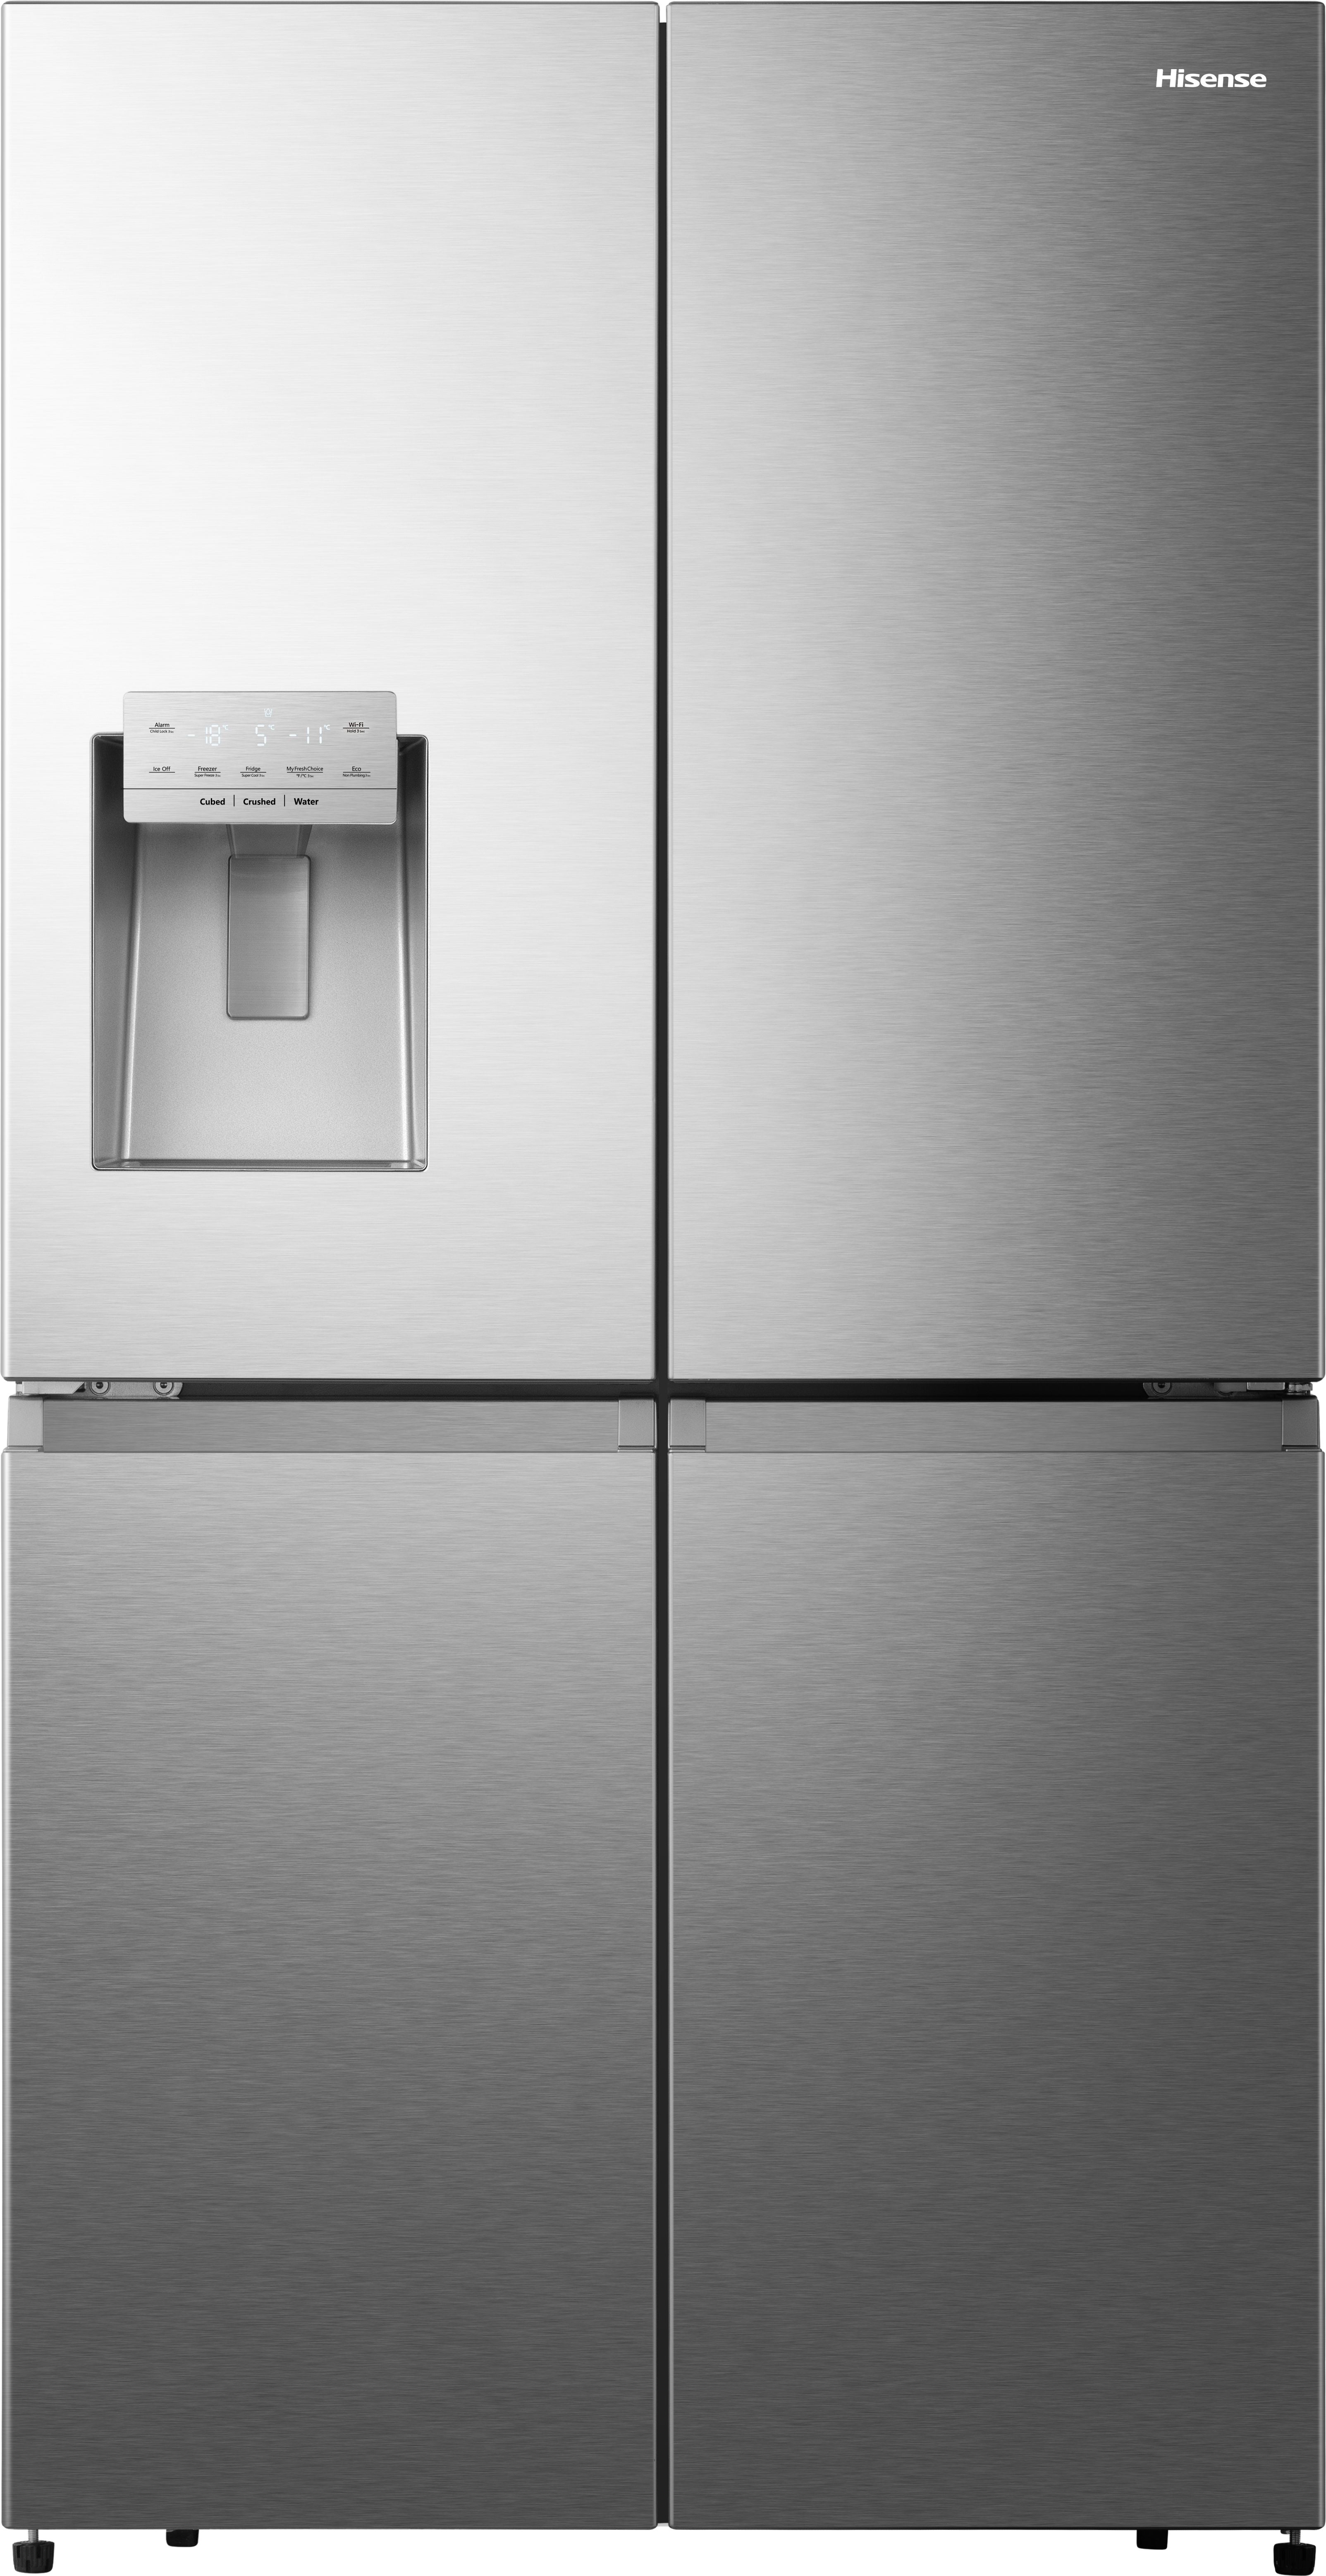 Hisense RQ760N4SASE Wifi Connected Non-Plumbed Total No Frost American Fridge Freezer - Stainless Steel - E Rated, Stainless Steel